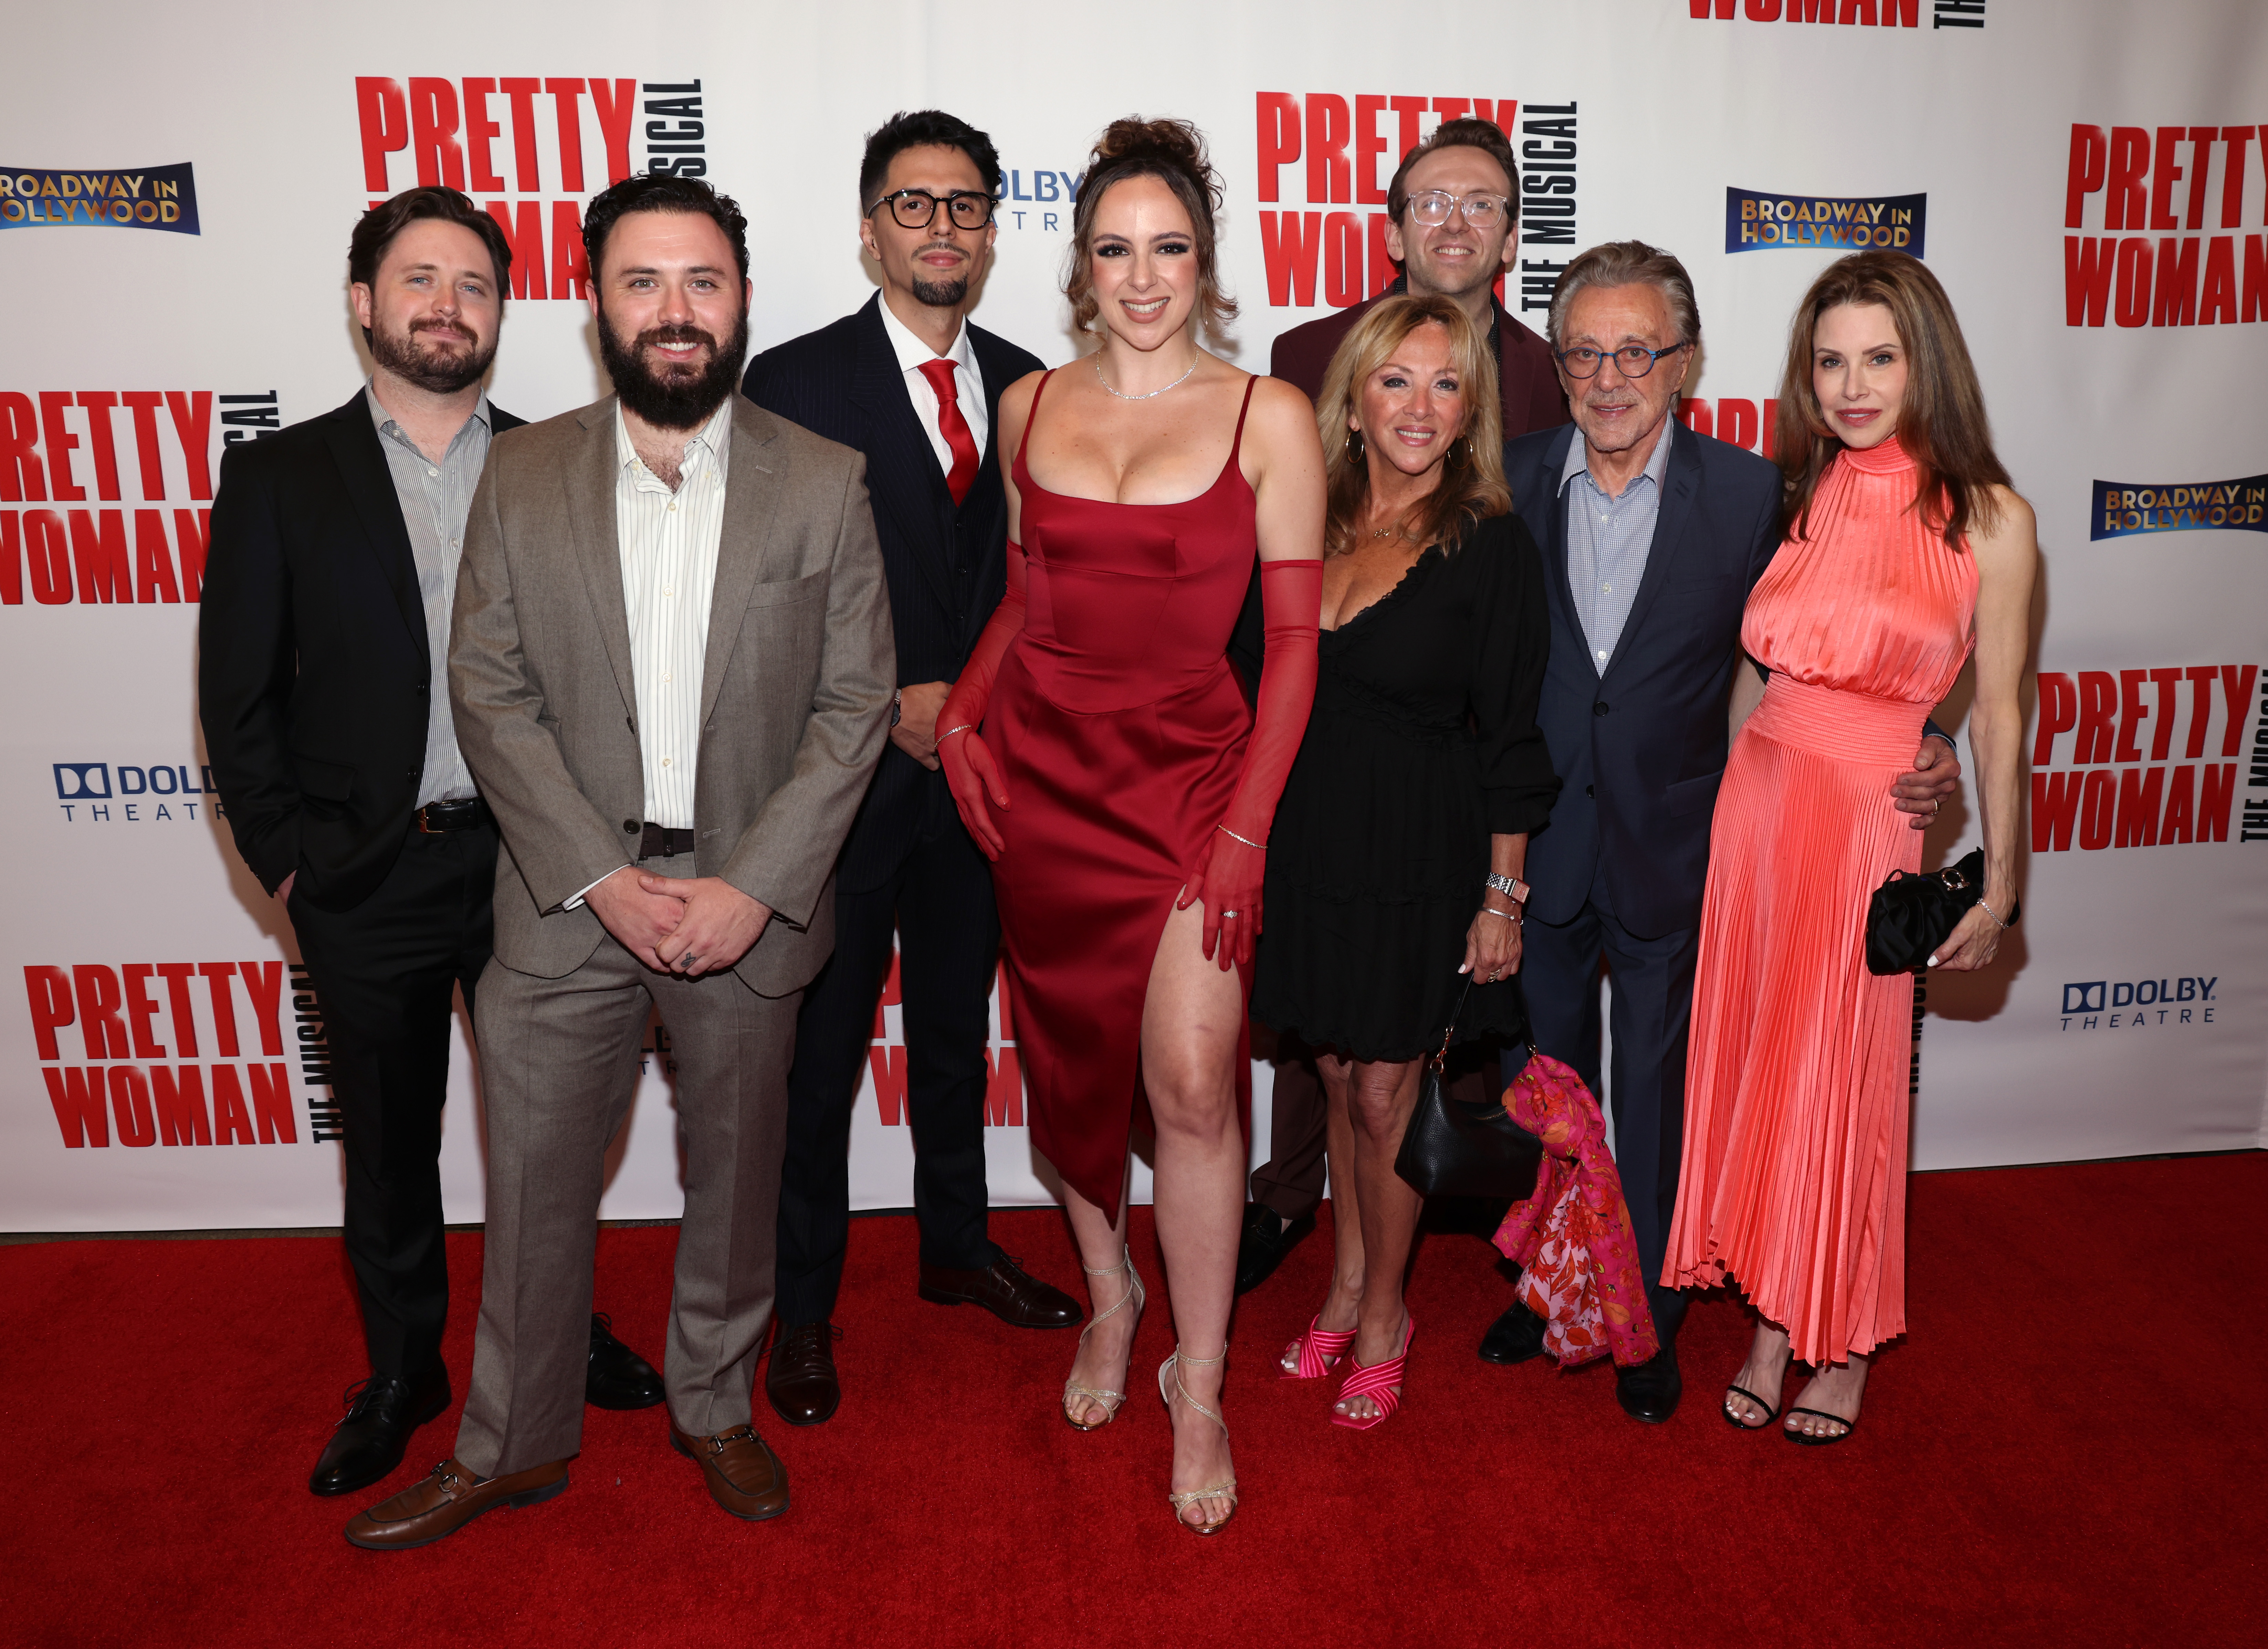 Brando, Emilio, Olivia, Antonia, Dario, and Frankie Valli, and Jackie Jacobs at the Los Angeles opening night for "Pretty Woman The Musical" on June 17, 2022, in Hollywood, California | Source: Getty Images